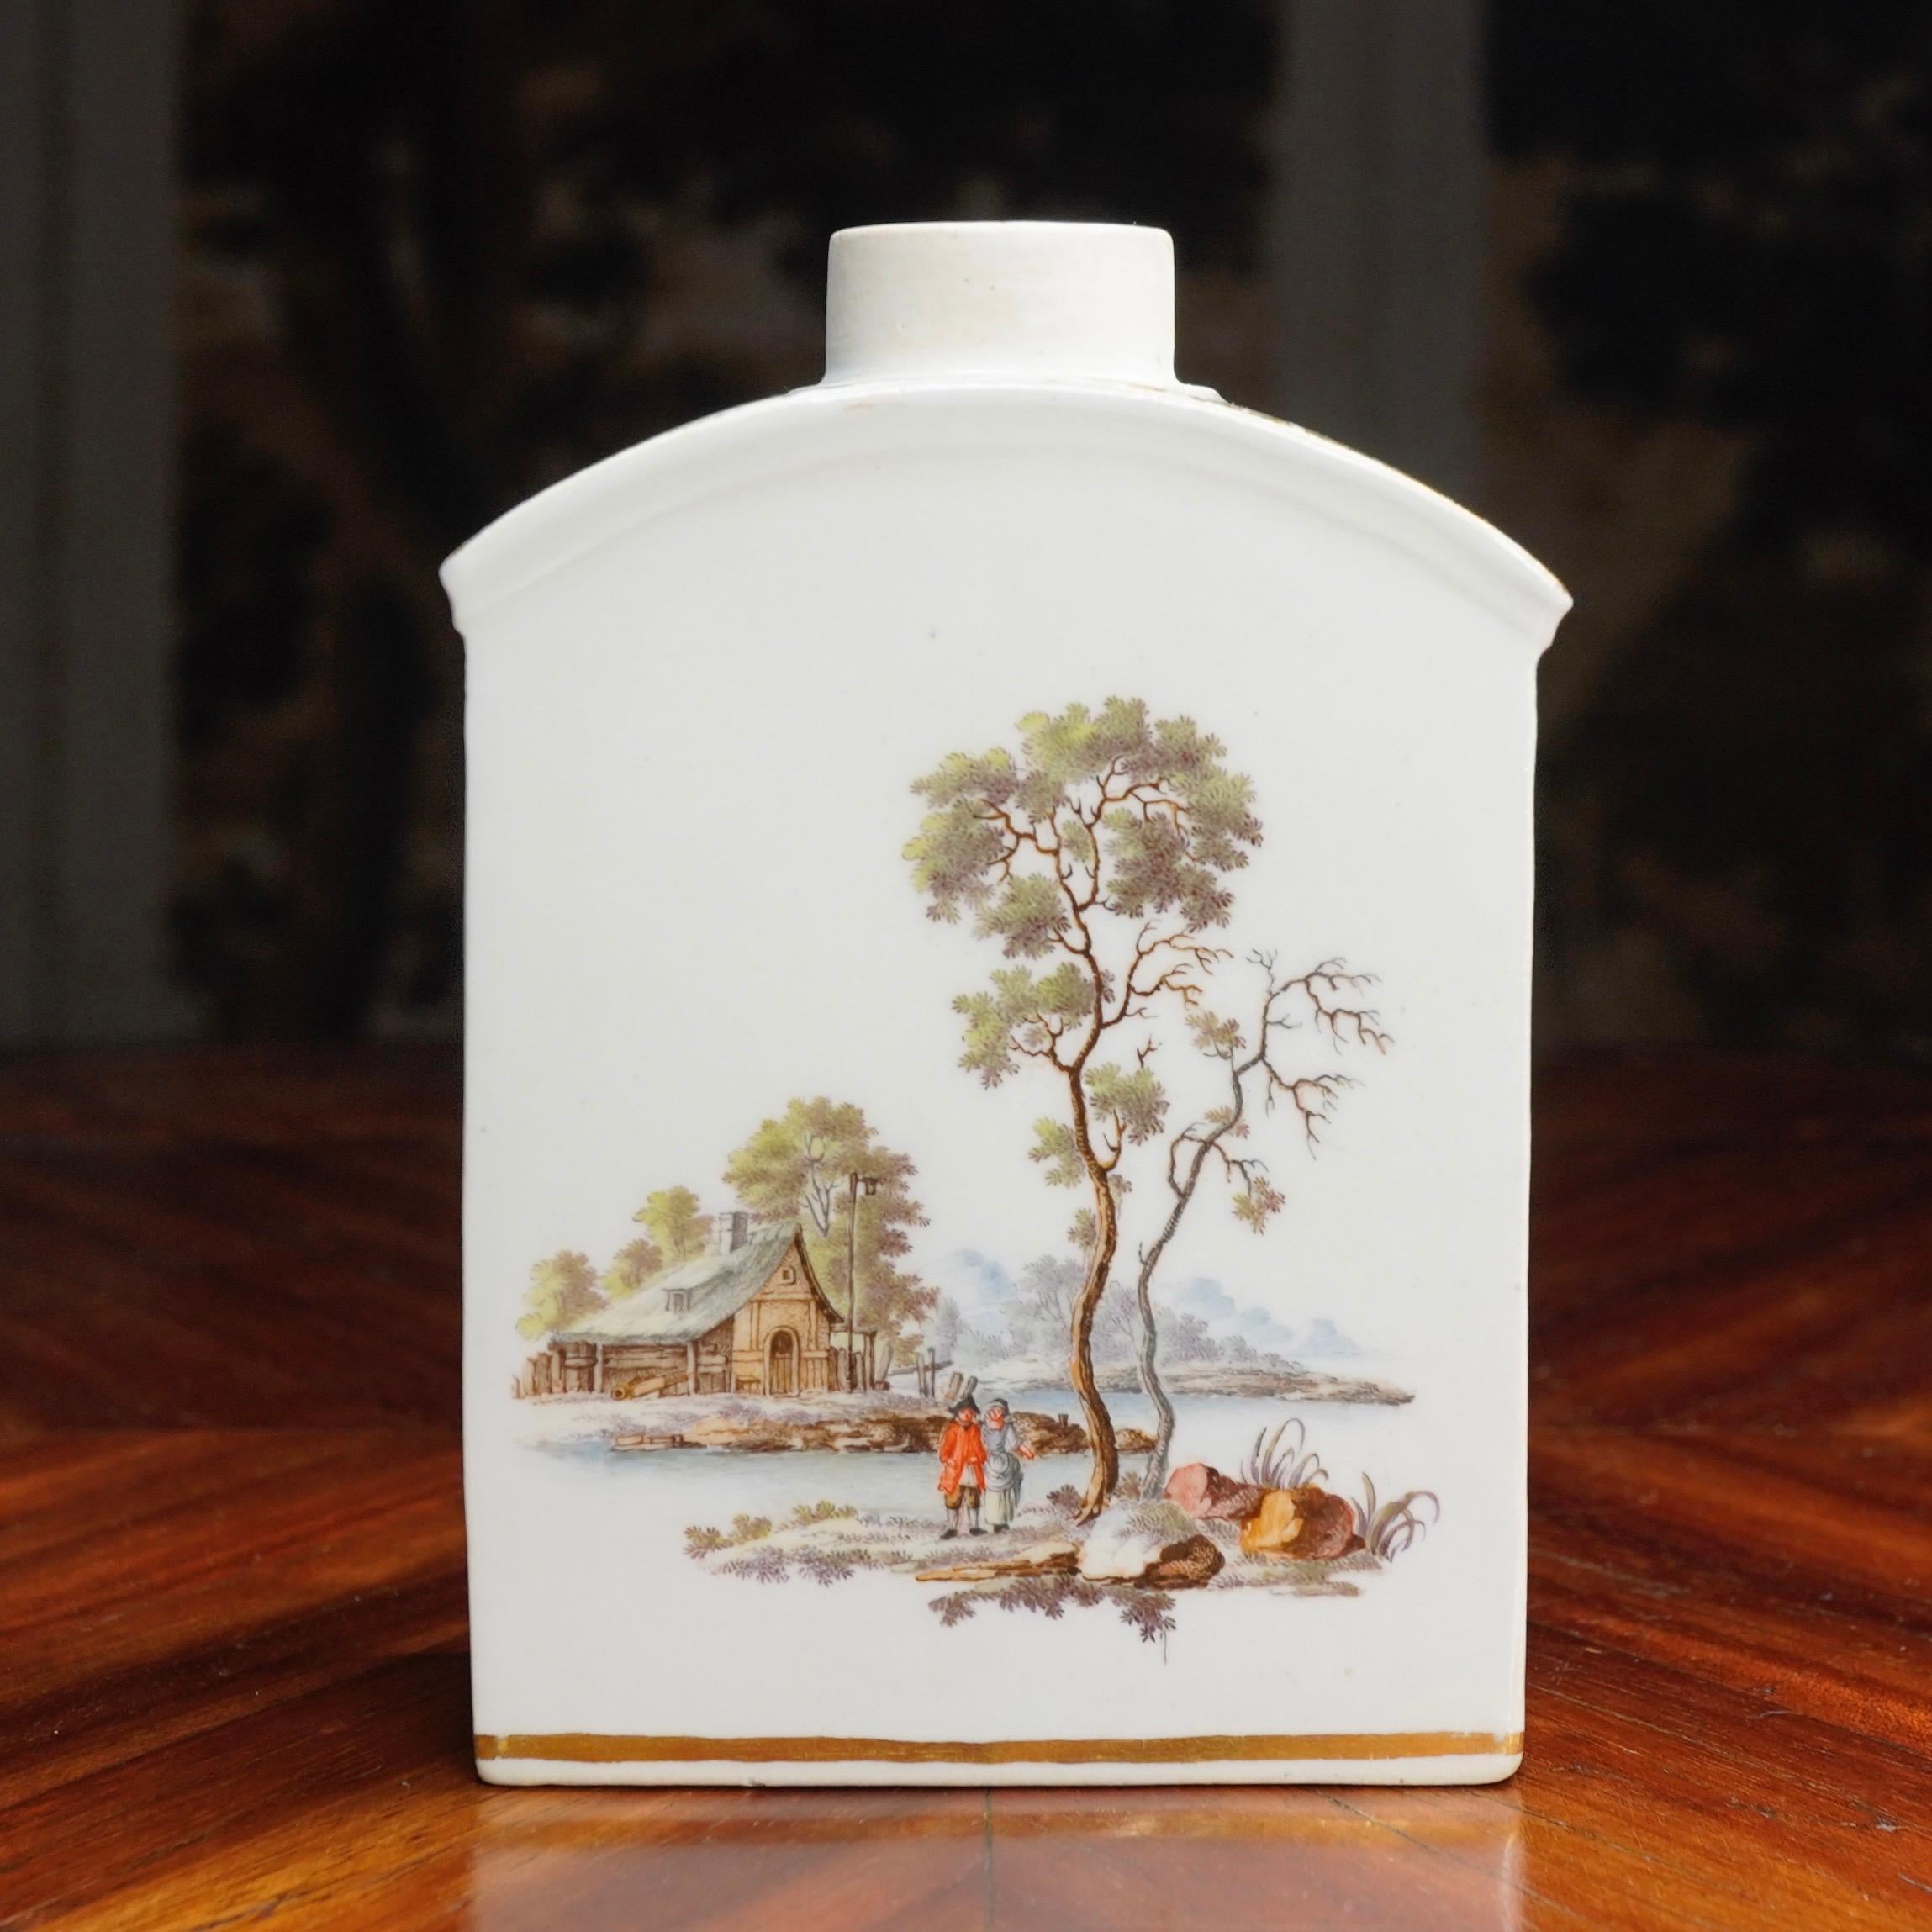 Rare Zurich (Switzerland) tea canister, painted with finely detailed landscapes in the Meissen manner.
‘Z’ and incised ‘D’ mark,
circa 1775.